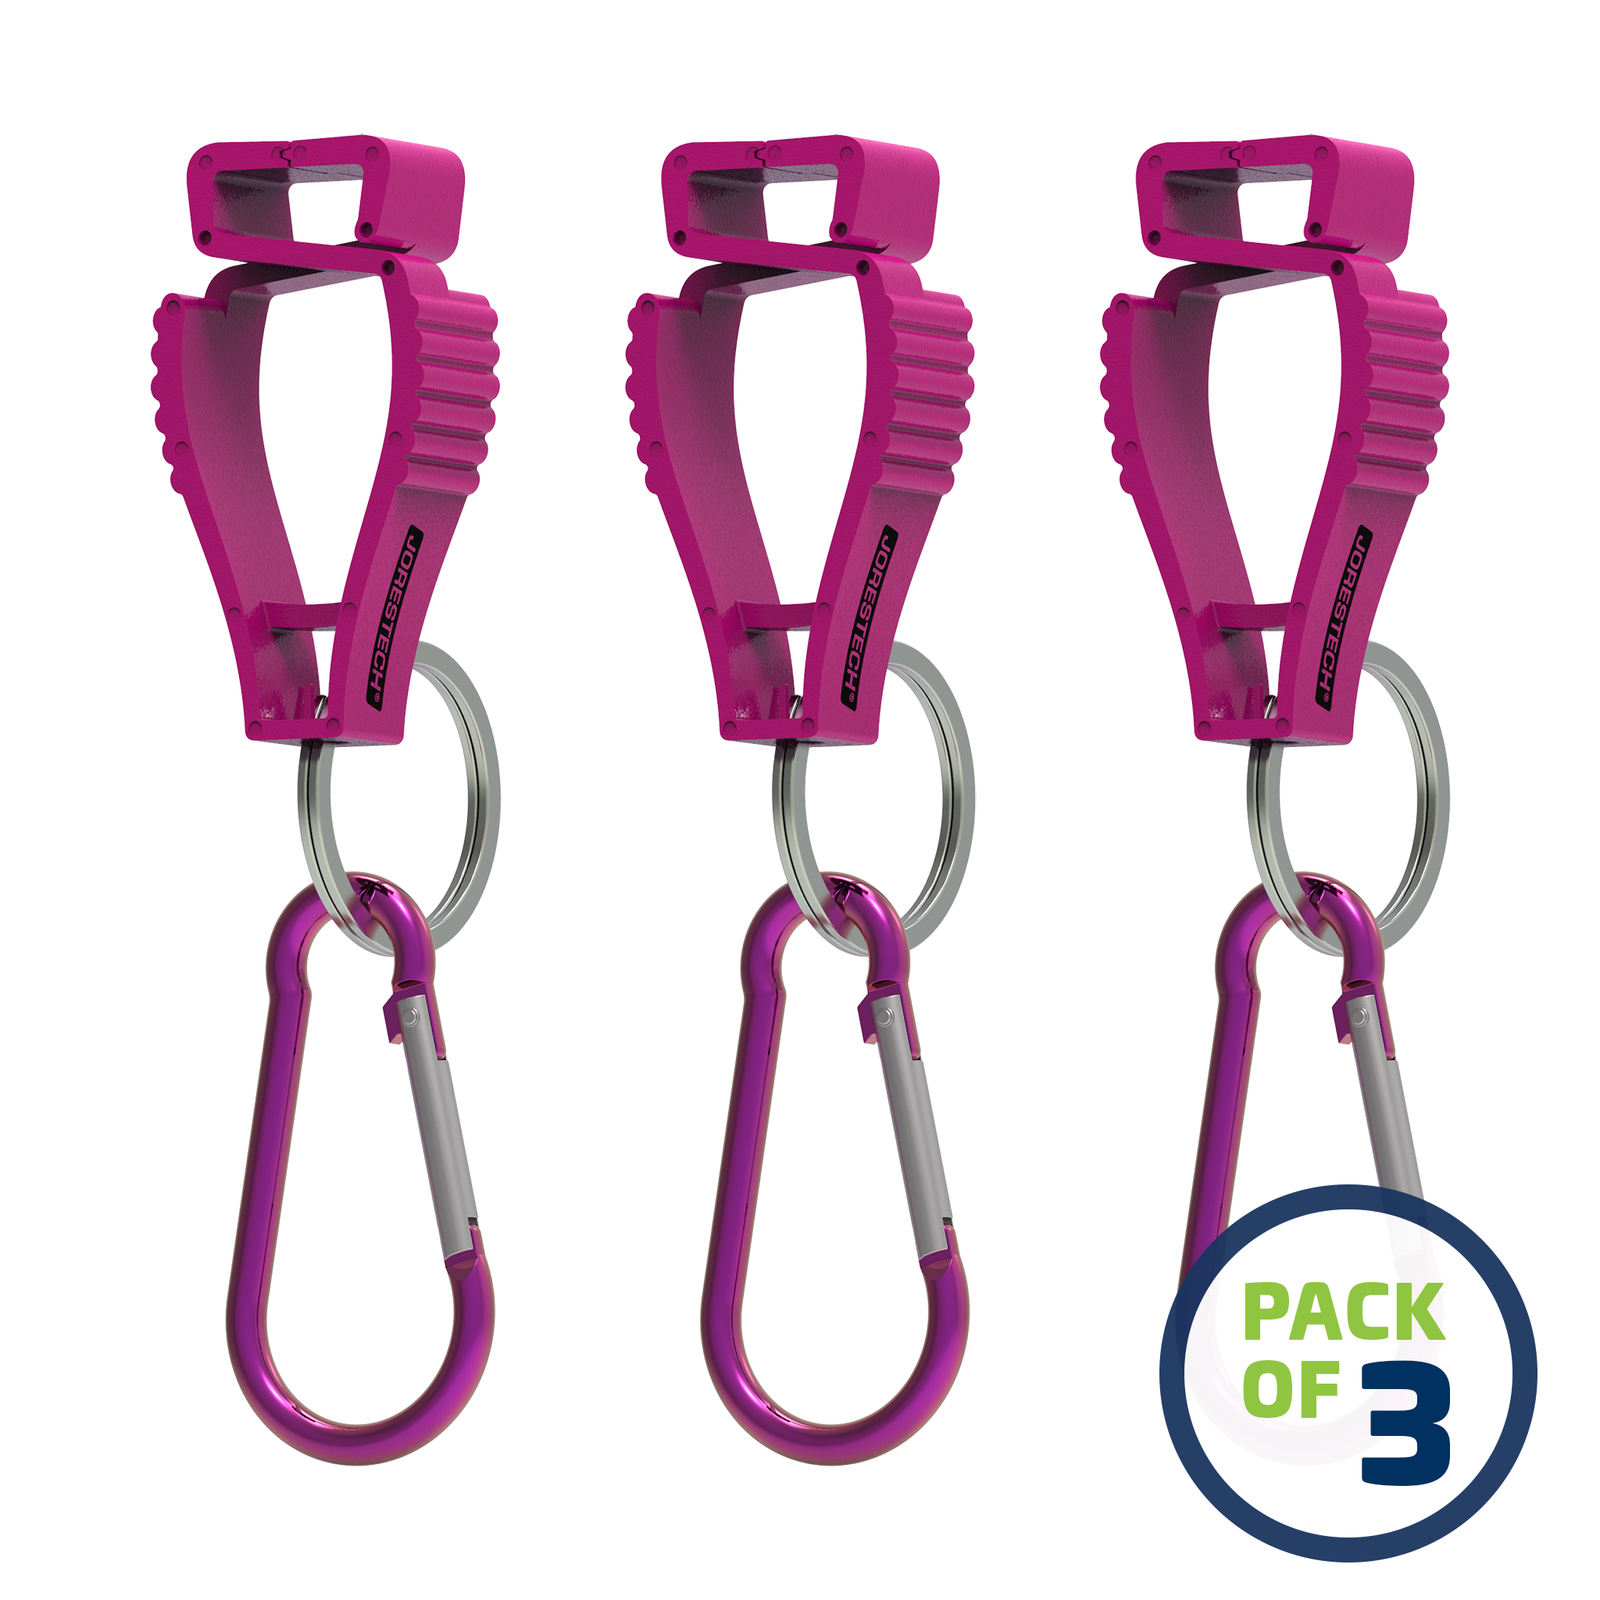 image of a pack of 3 Pink JORESTECH glove clip safety holders with carabiner over white background